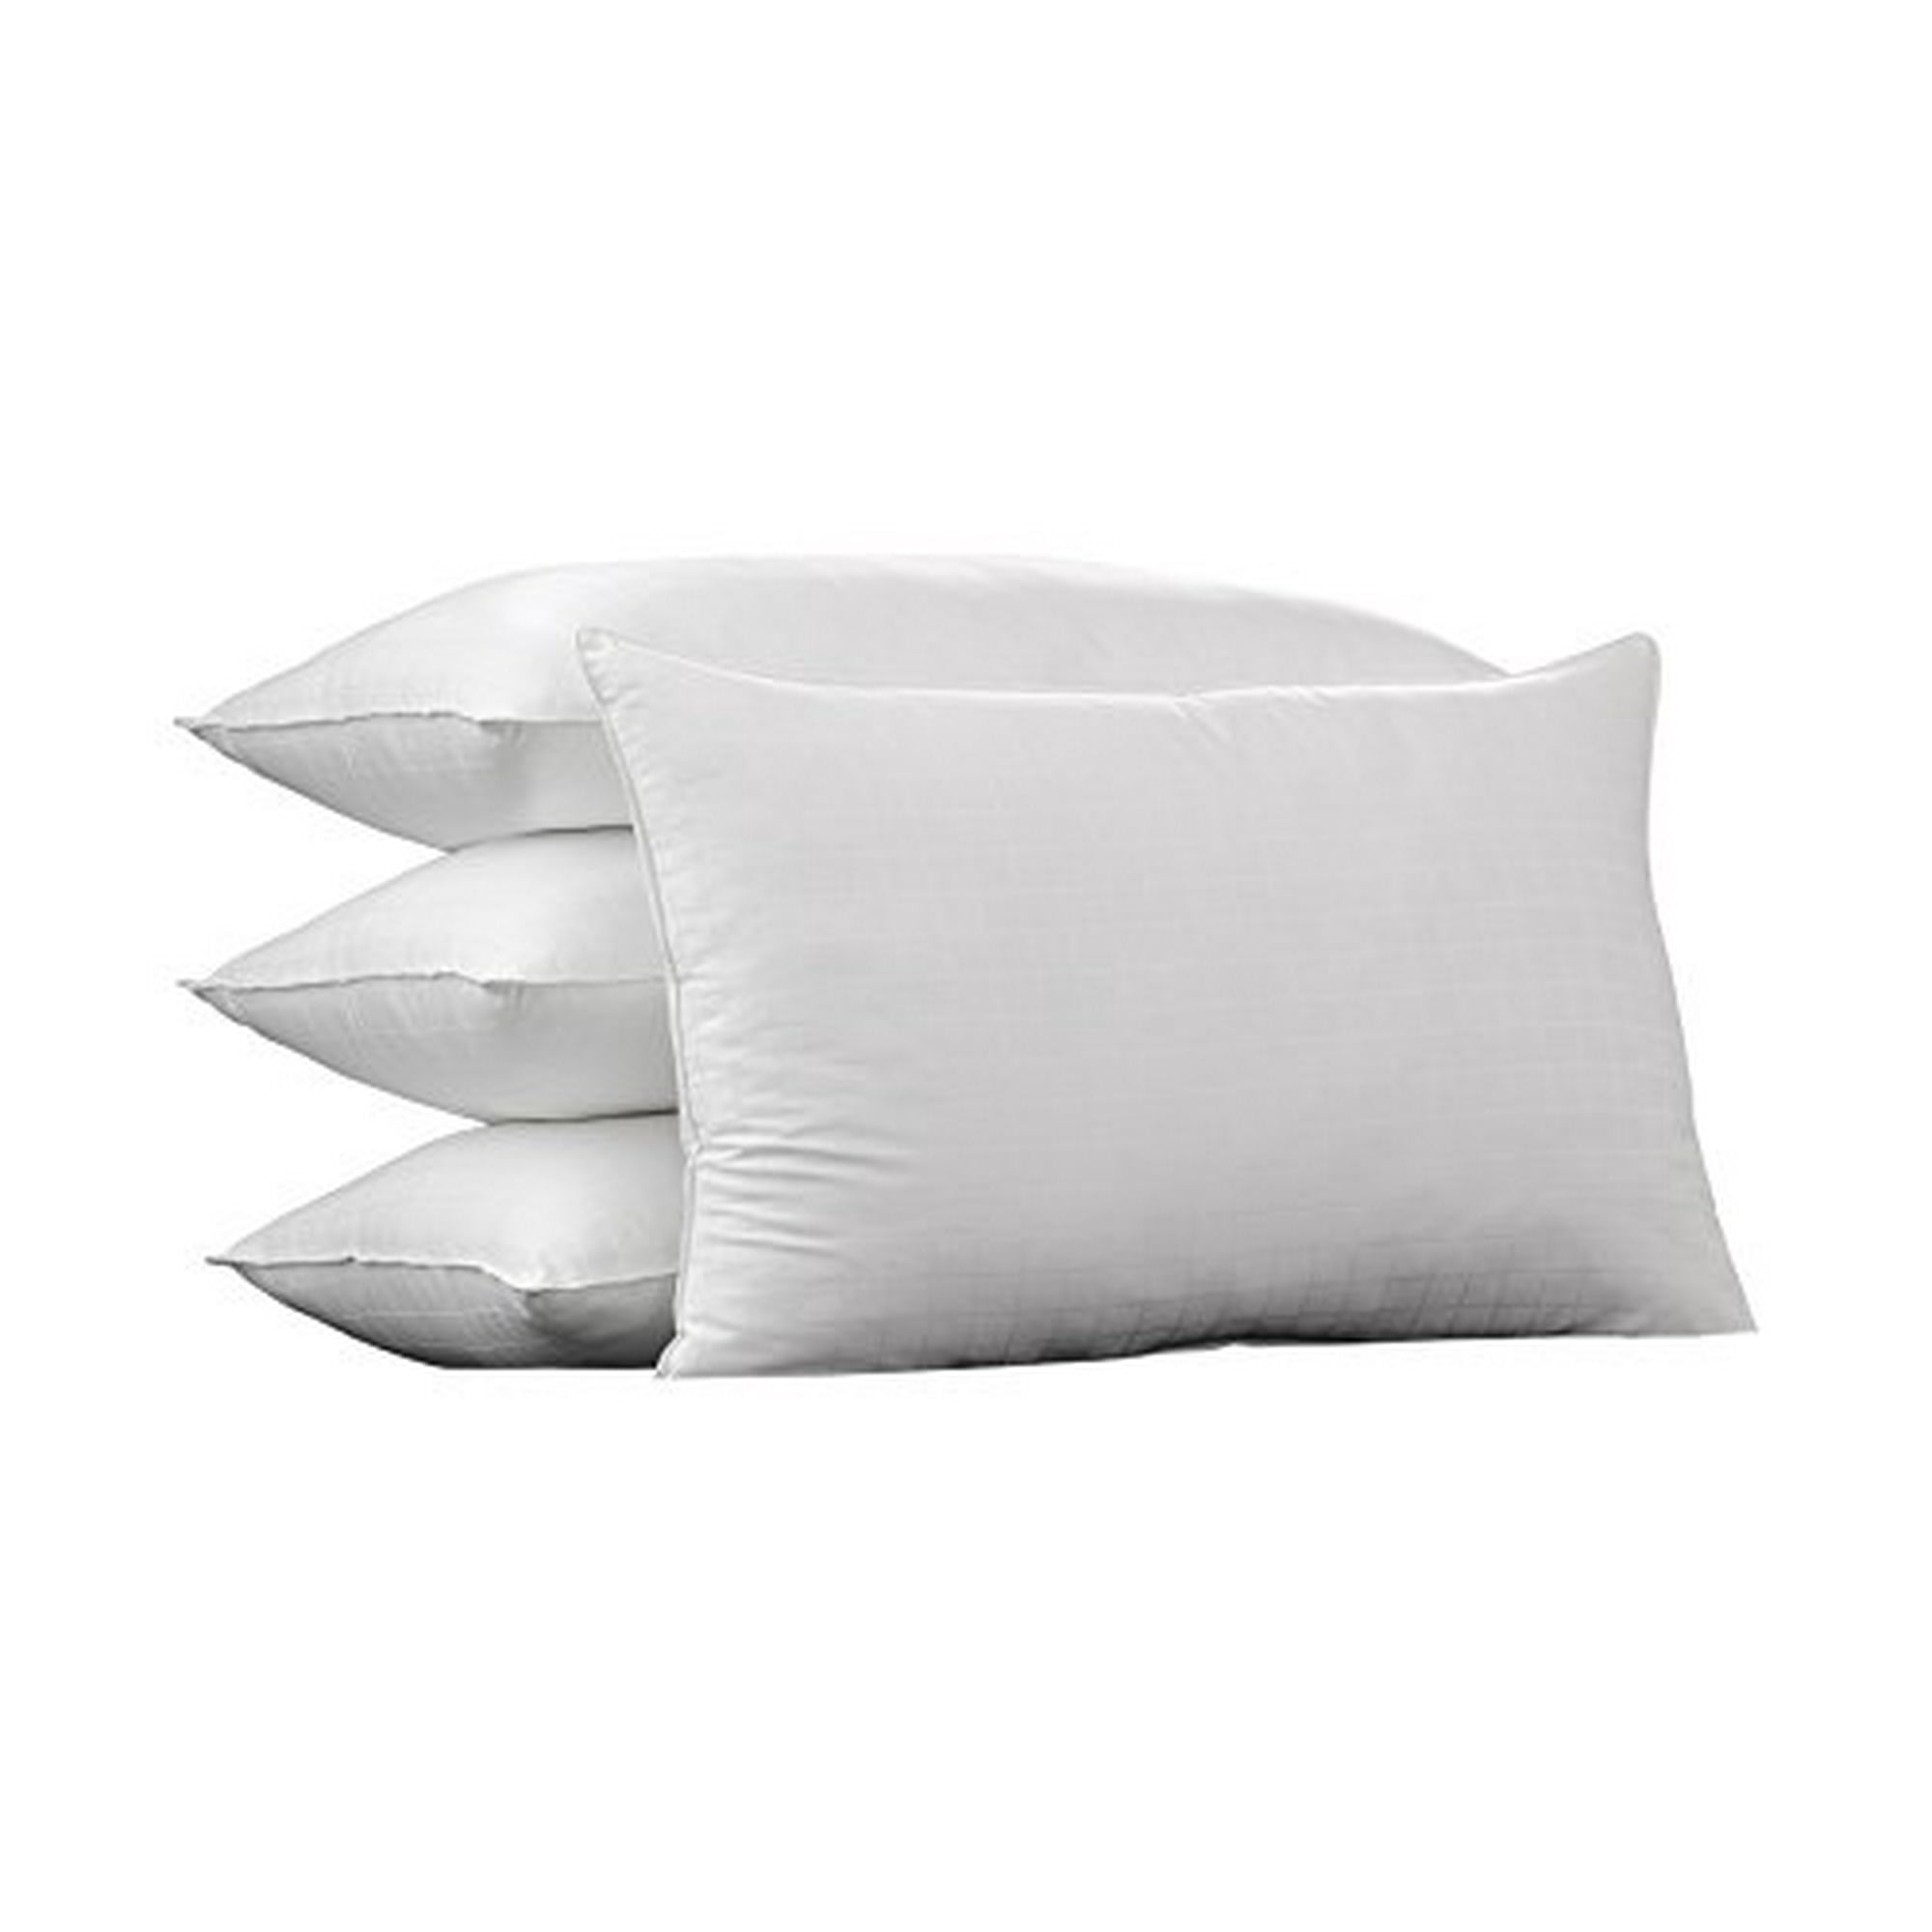 Ella Jayne Home King Size Bed Pillows, King Size Bed Pillows Firm